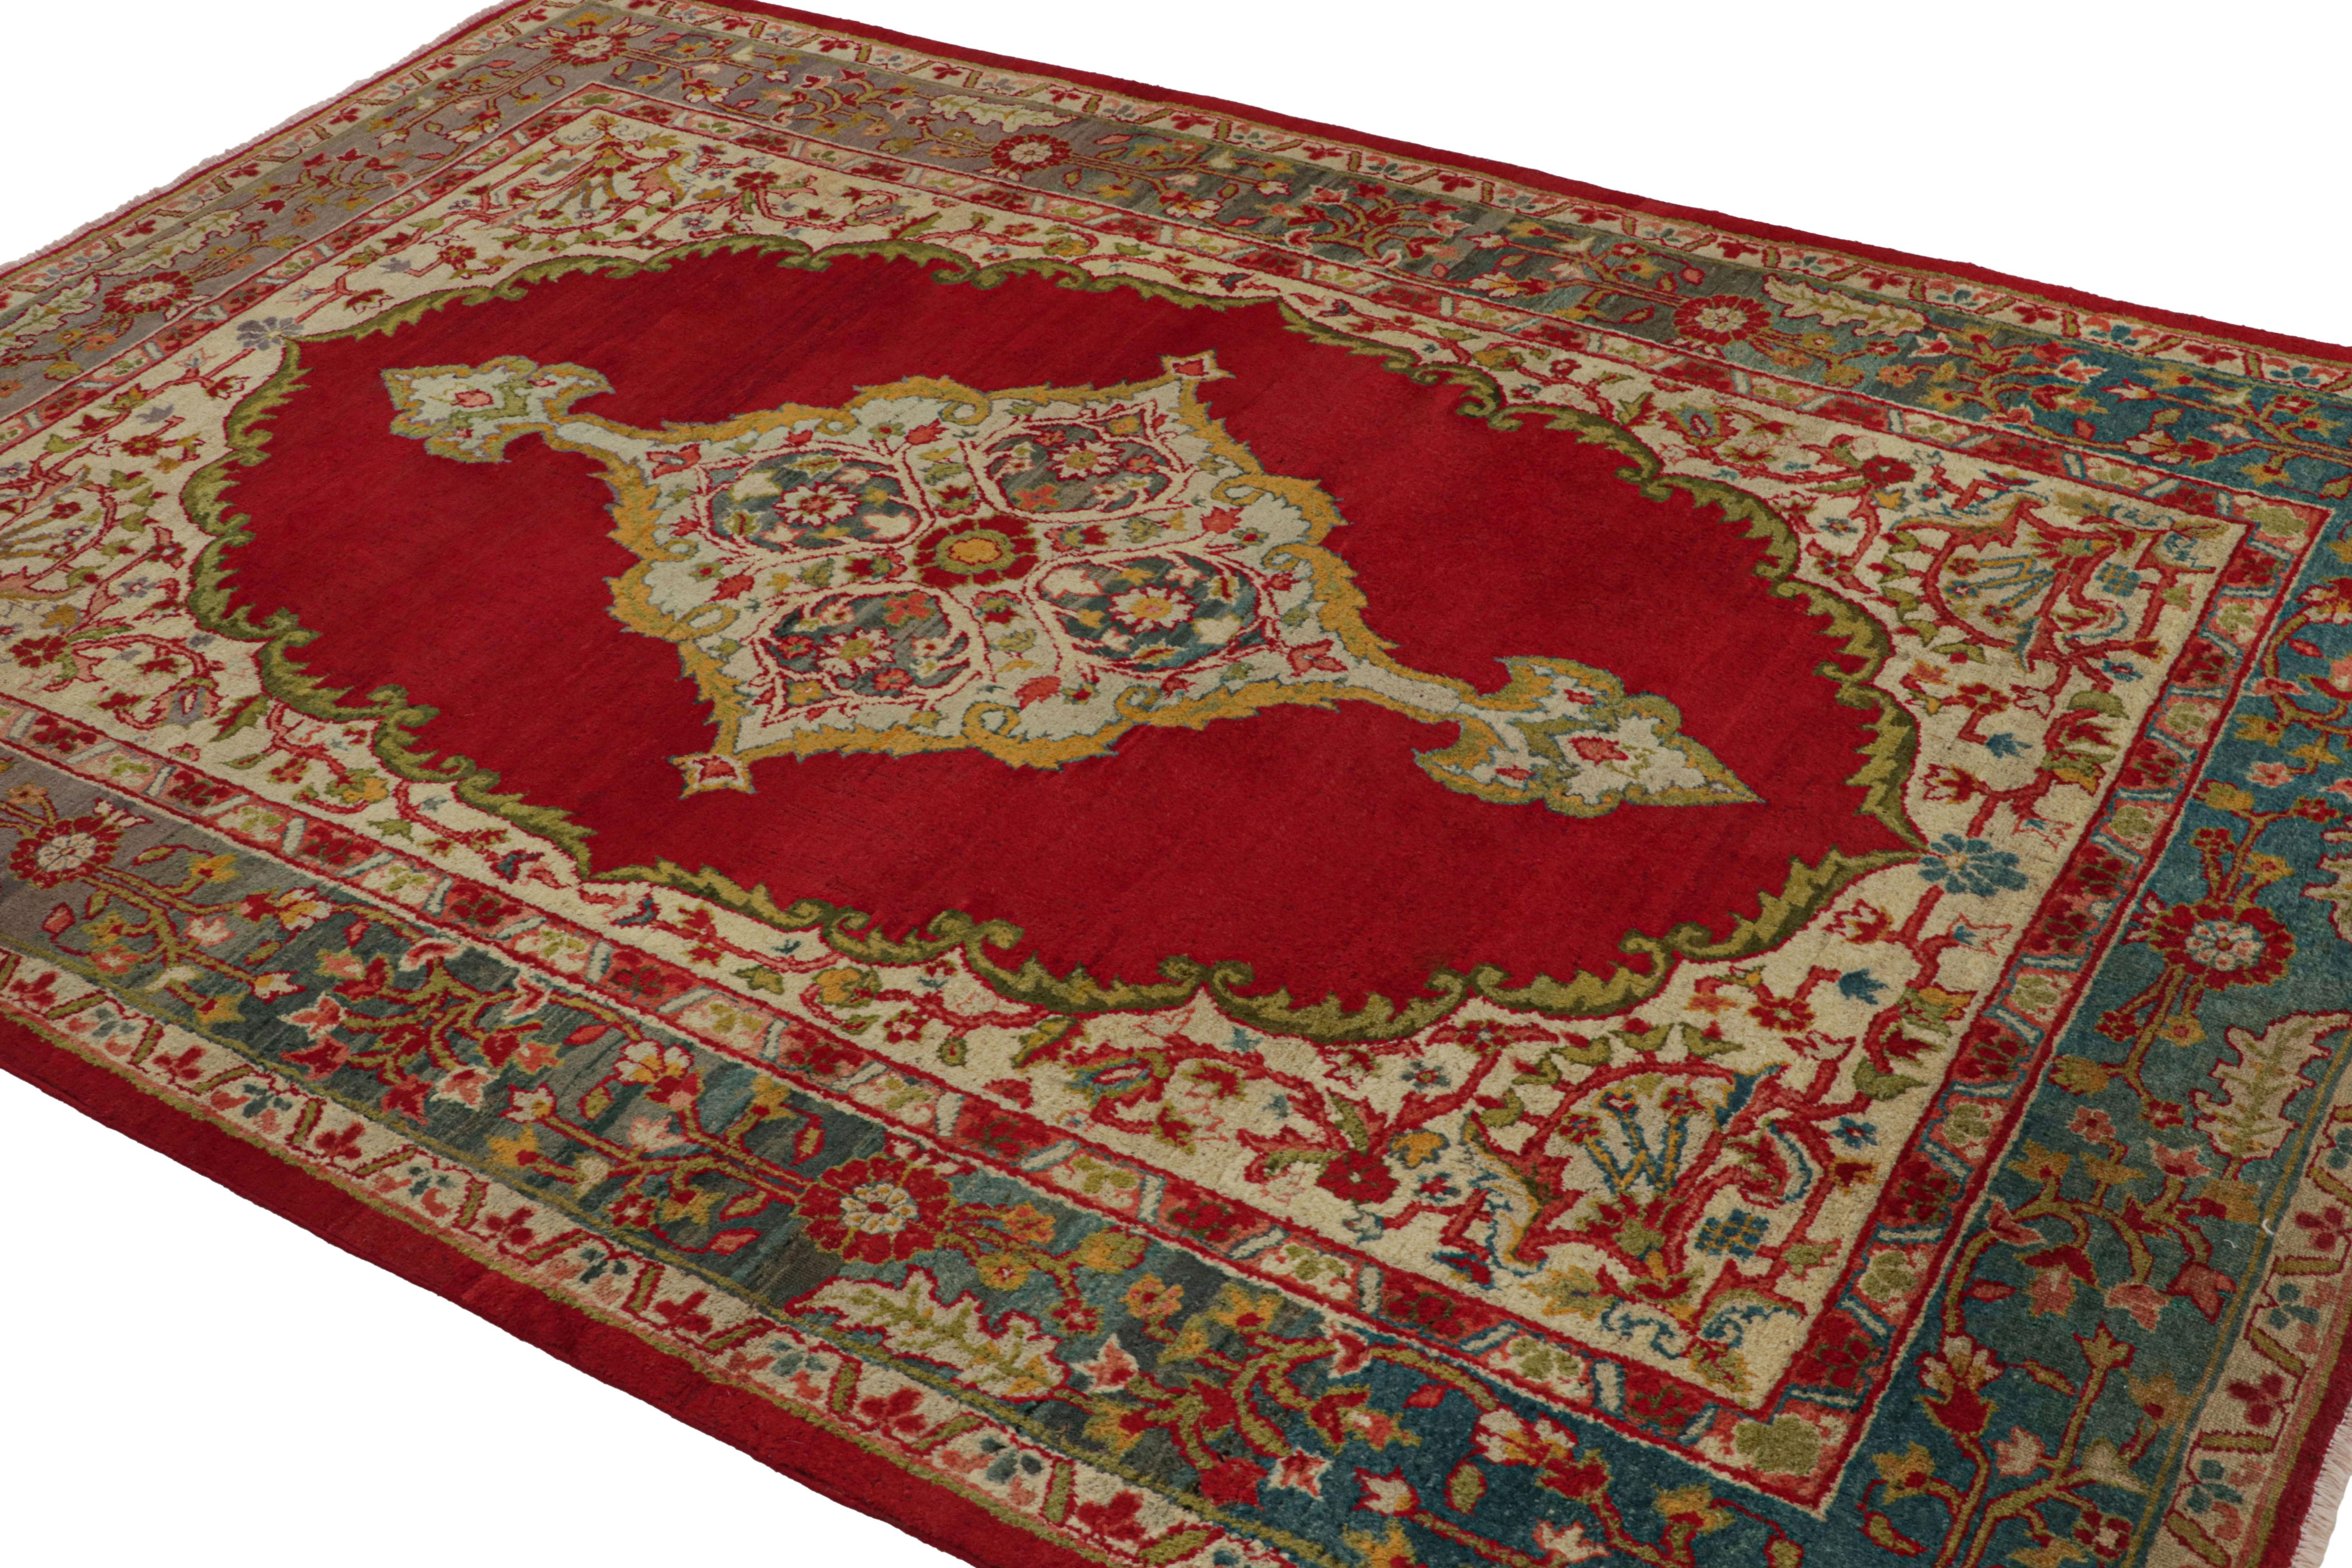 This is a very 6x8 rare antique Amritsar rug from India, hand-knotted in wool and believed to originate from India circa 1920-1930. 

On the Design: 

Connoisseurs may admire this design with a rich, saturated red open field underscores a finely